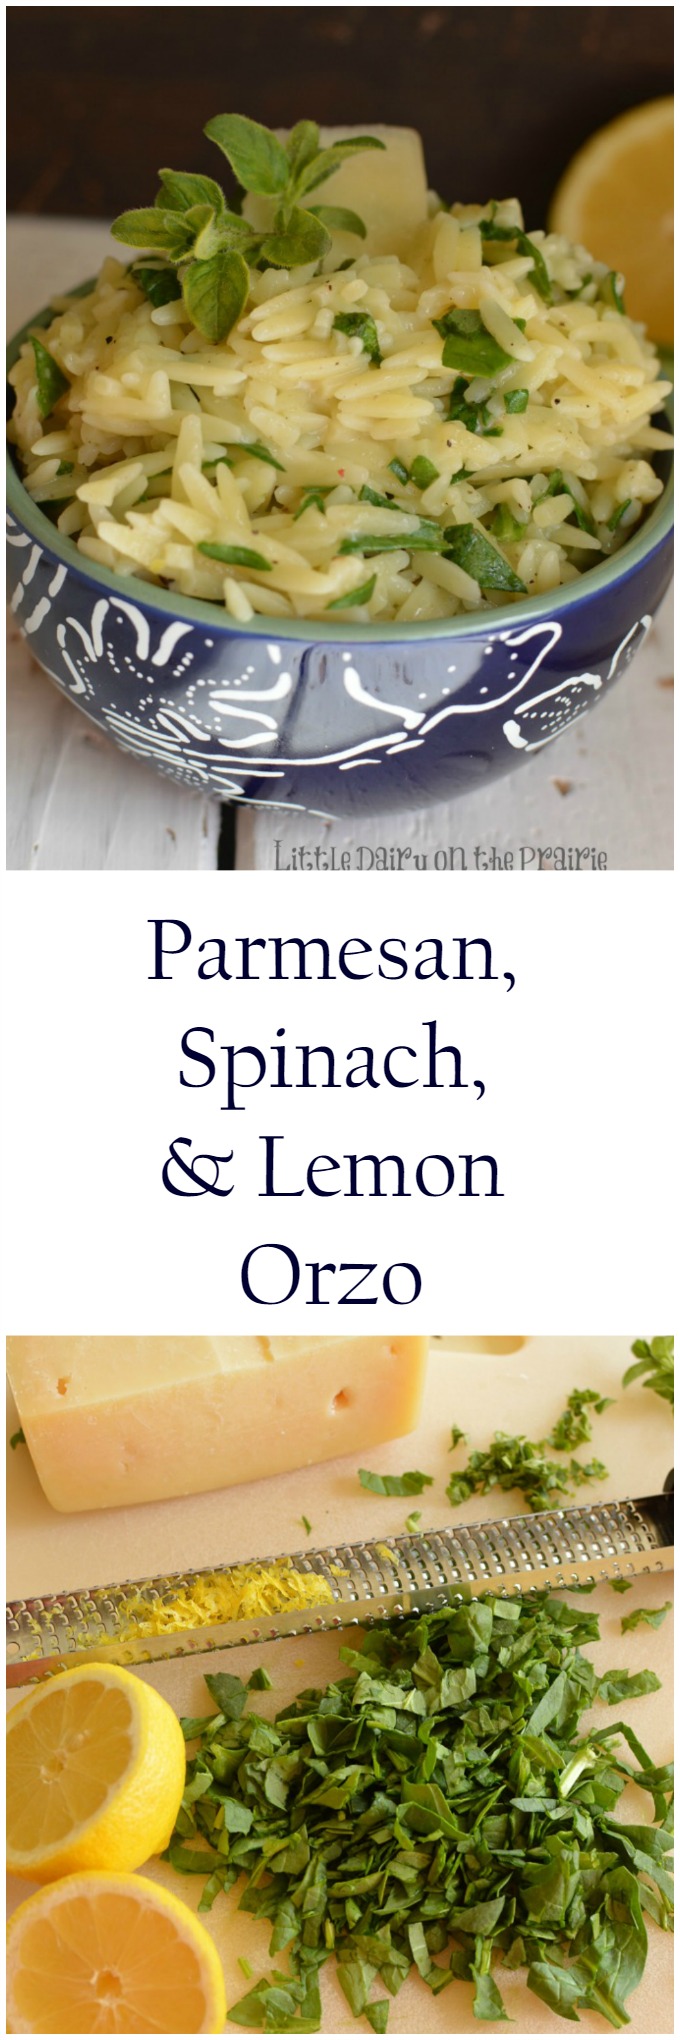 Parmesan, Spinach, and Orzo is a light and refreshing side dish your whole family will fall in love with!